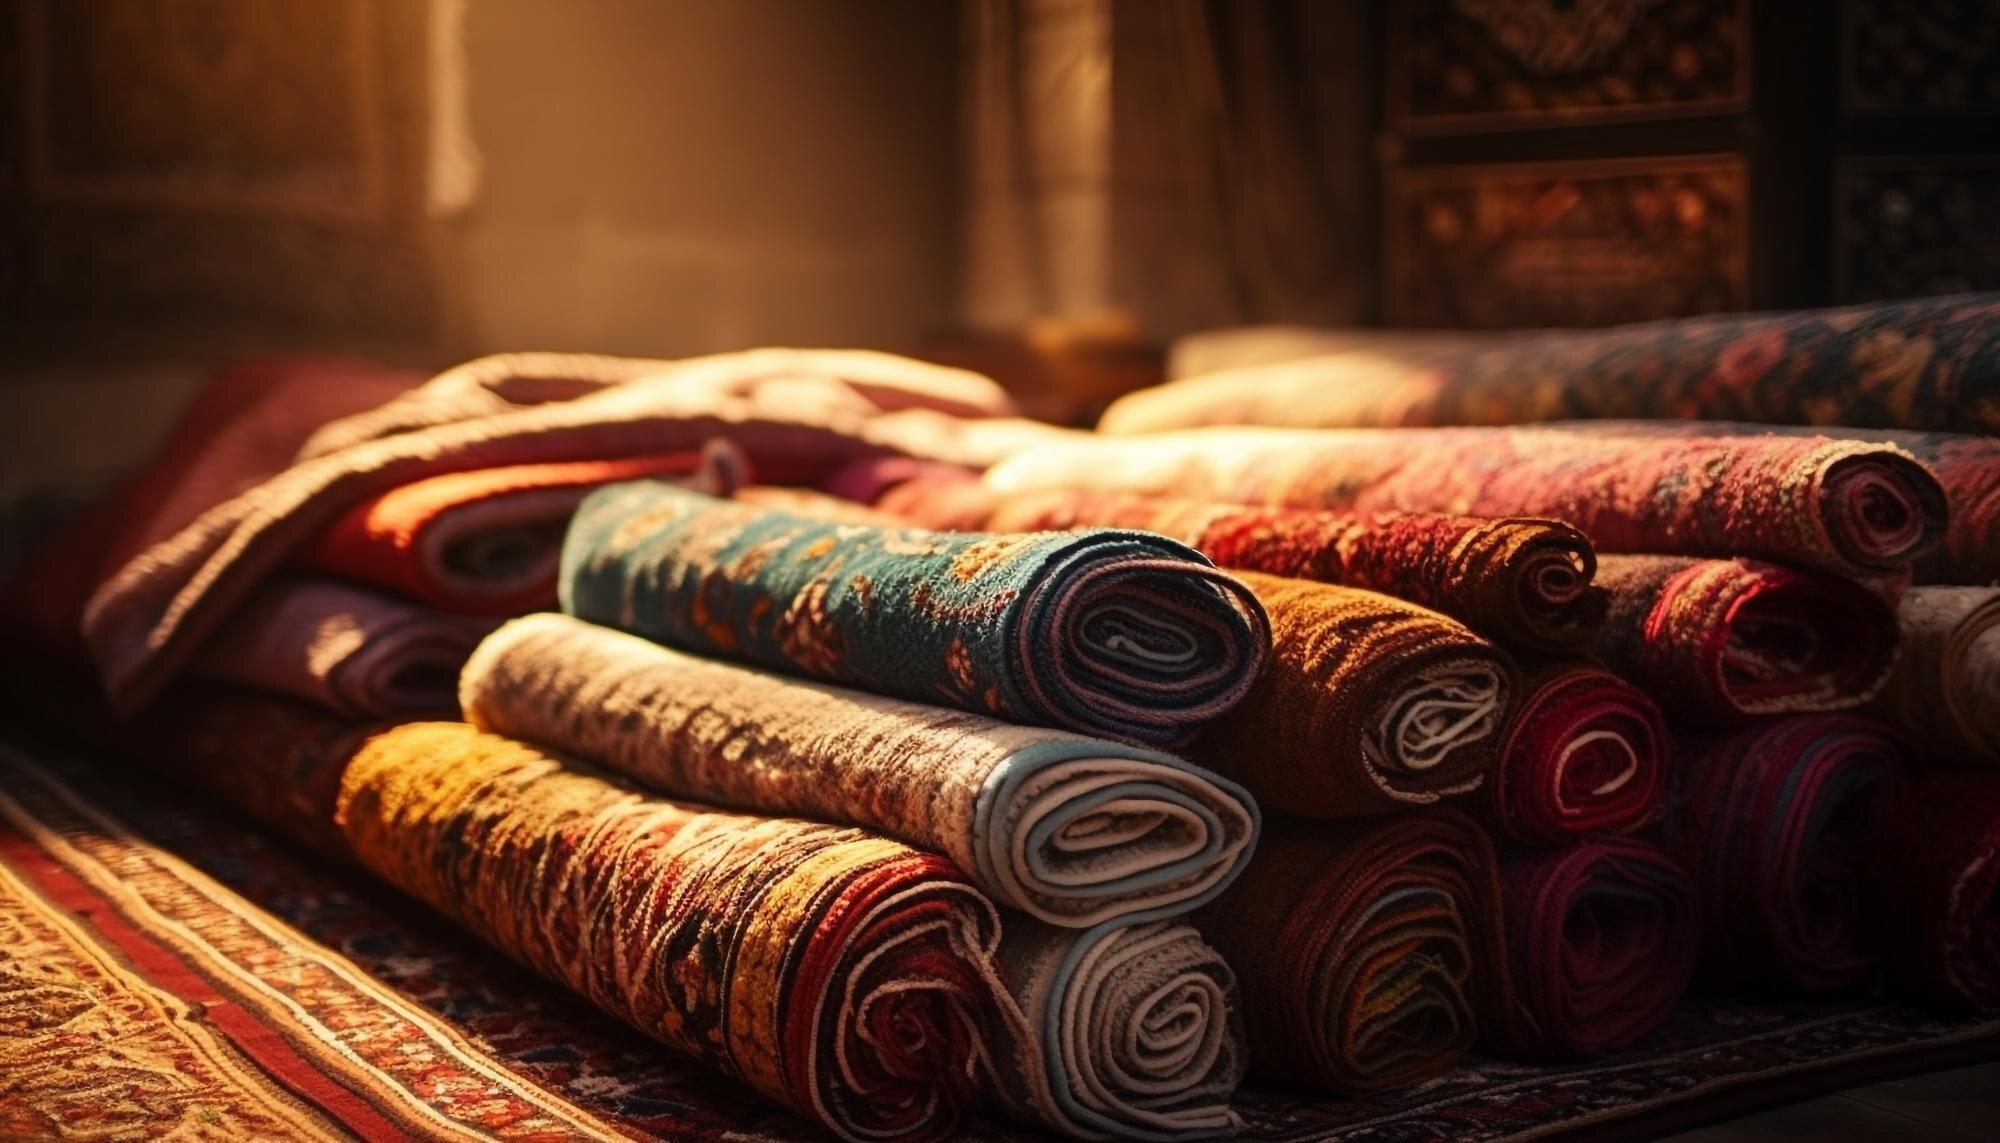 softness-elegance-old-fashioned-textiles-pile-high-generated-by-ai-188544-20510-1.jpg